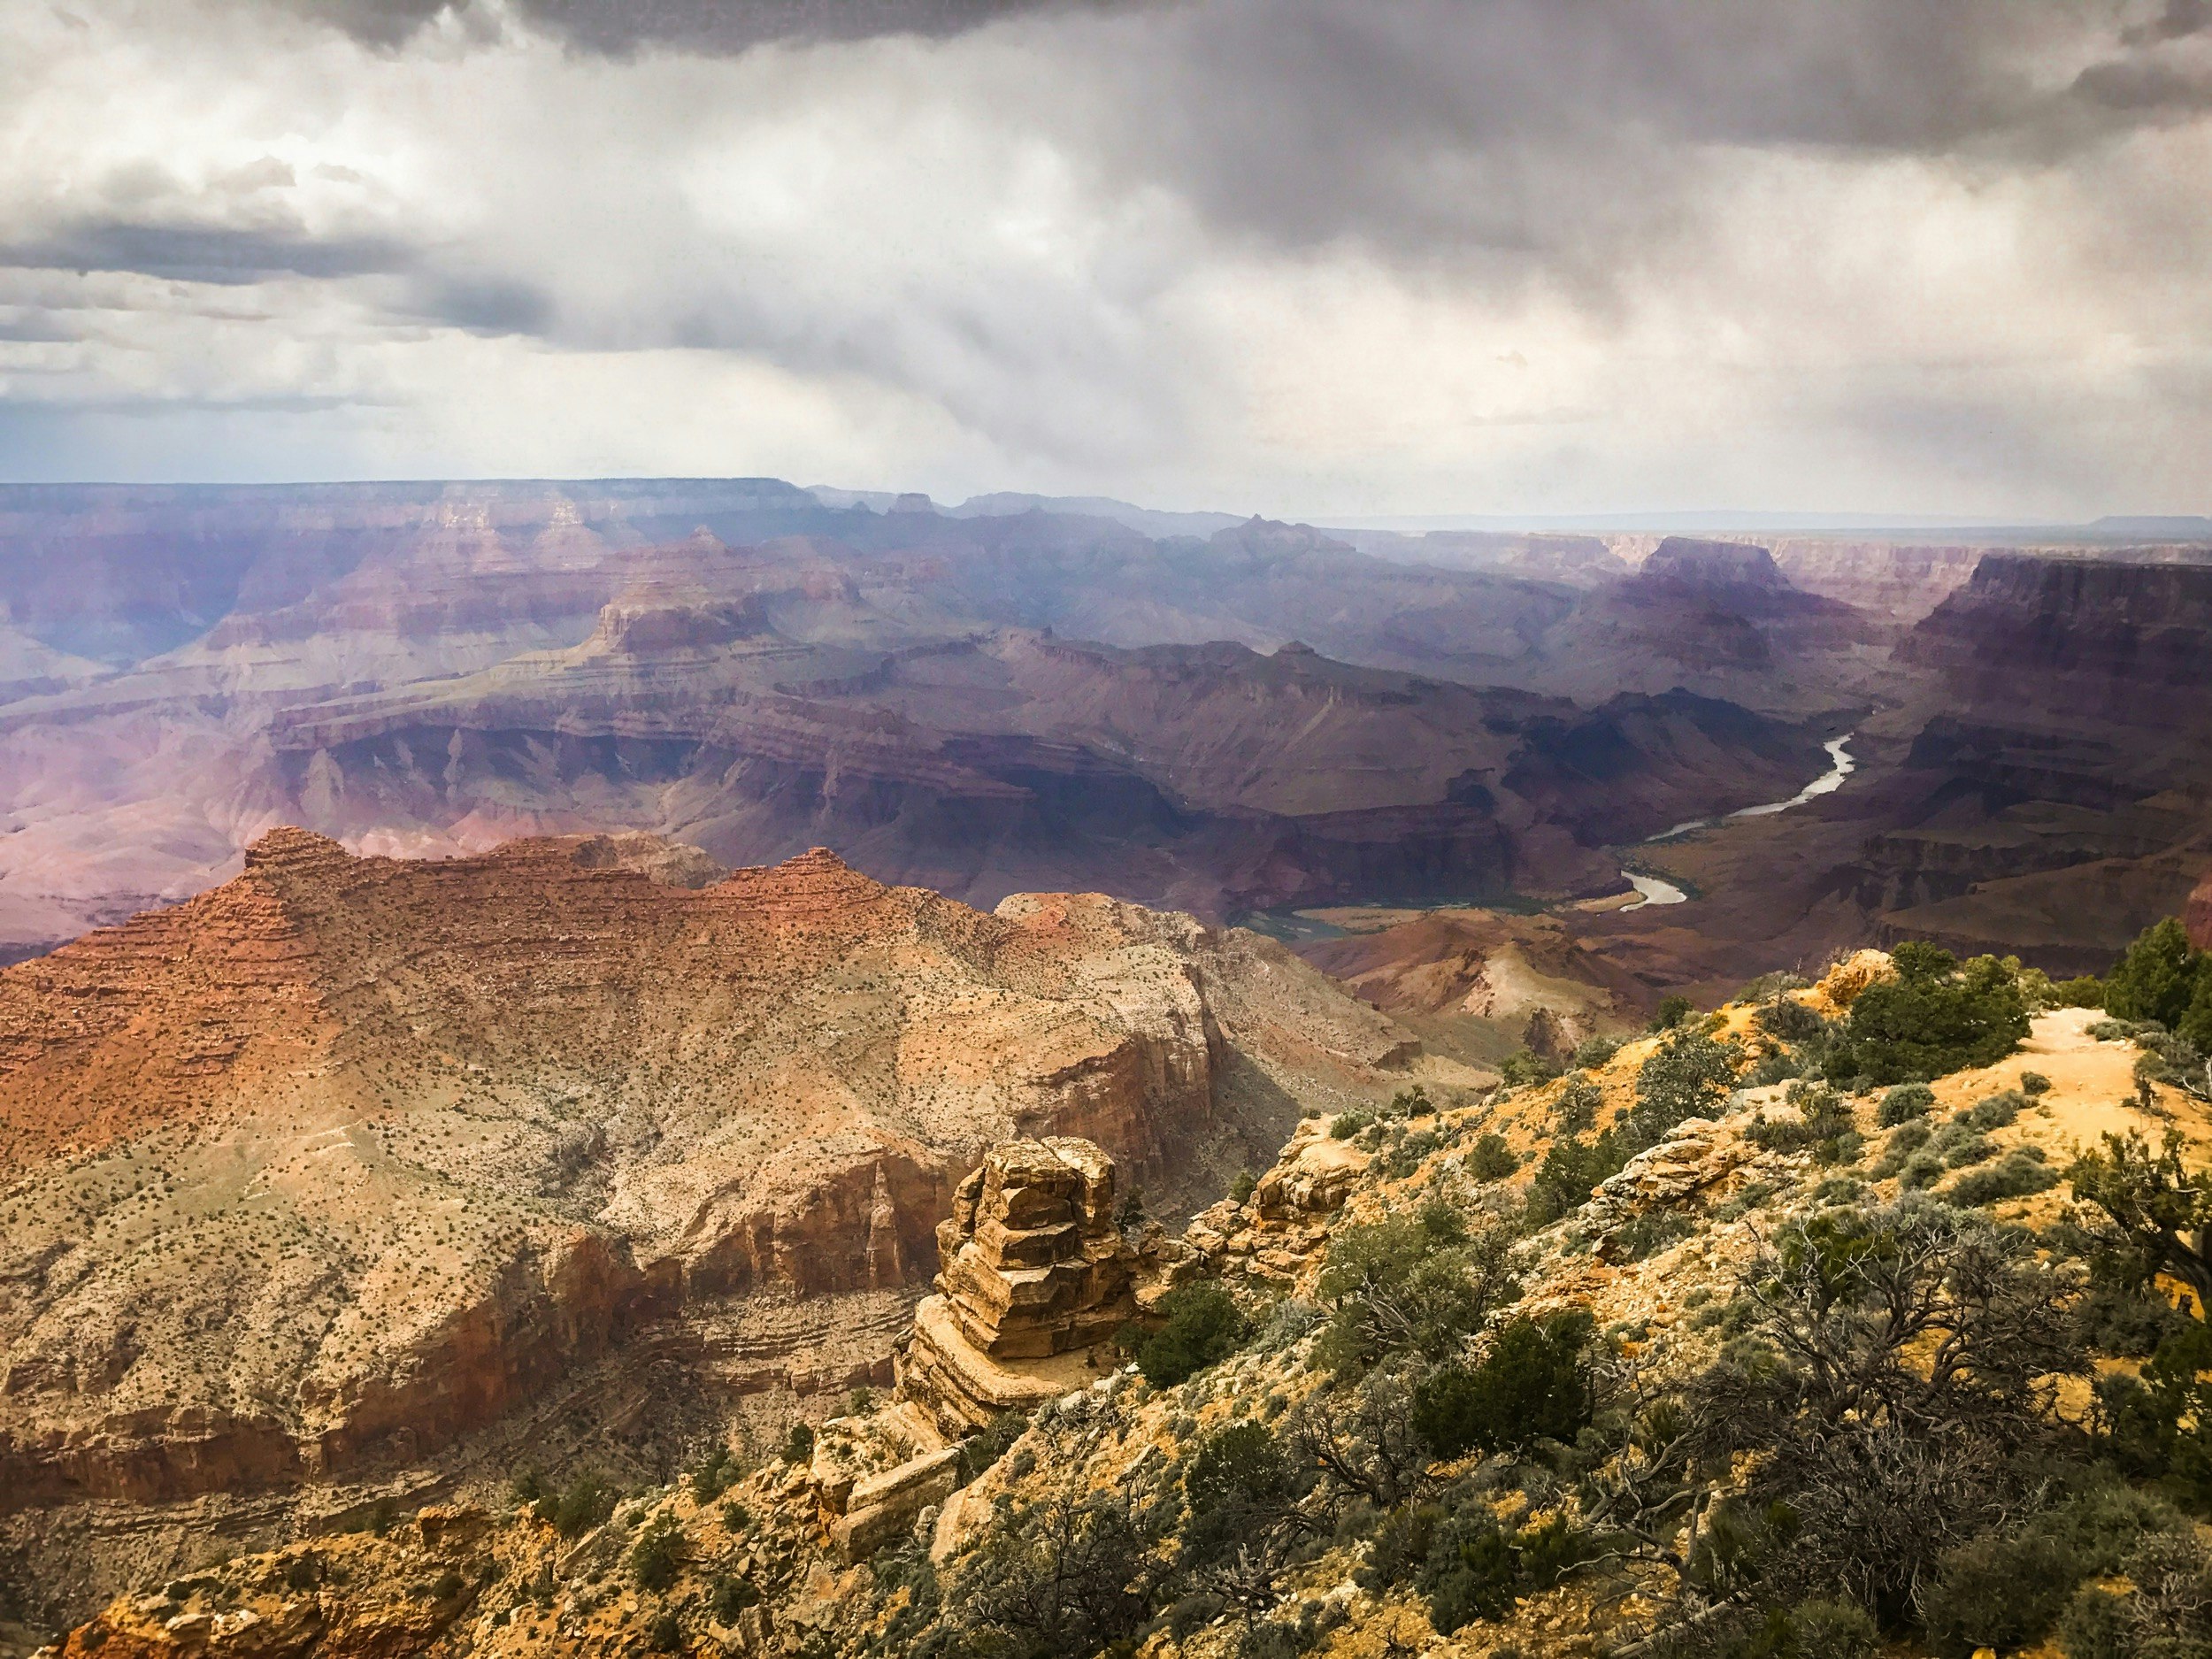 Looking down into the Grand Canyon from the rim, with striations and the river snaking off in the distance visible